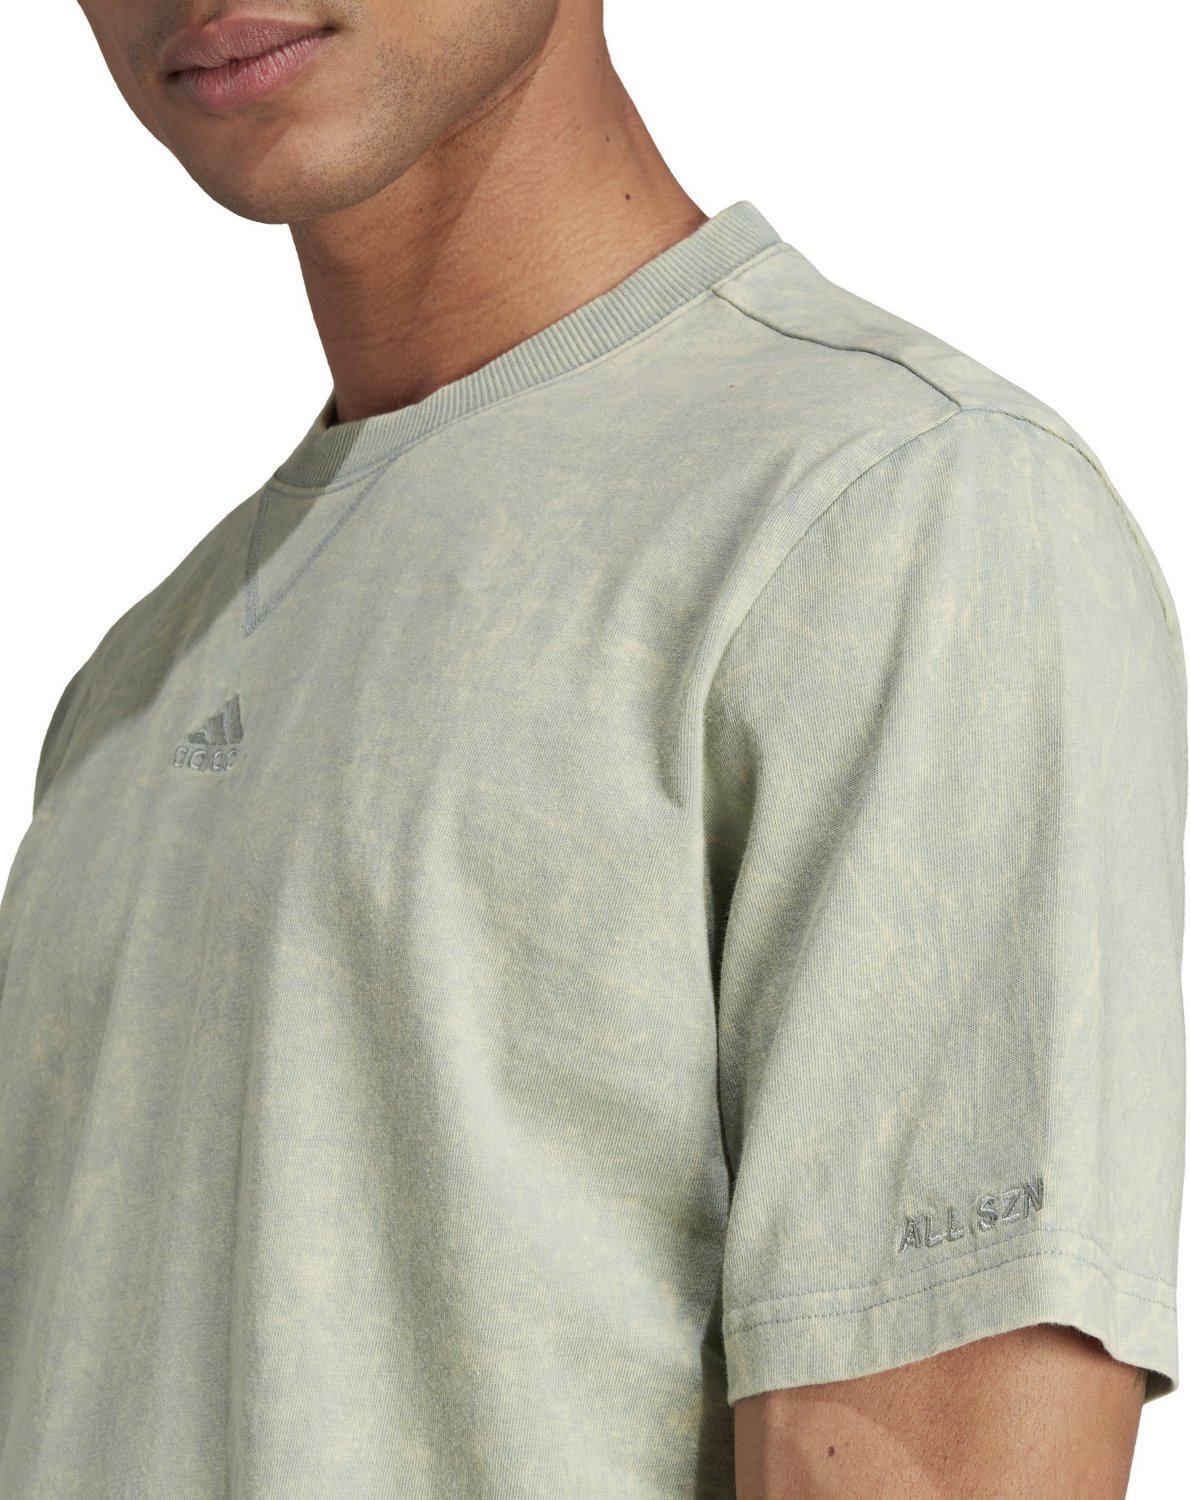 | T-shirt Men\'s Washed All Szn Shipping at Free Academy adidas